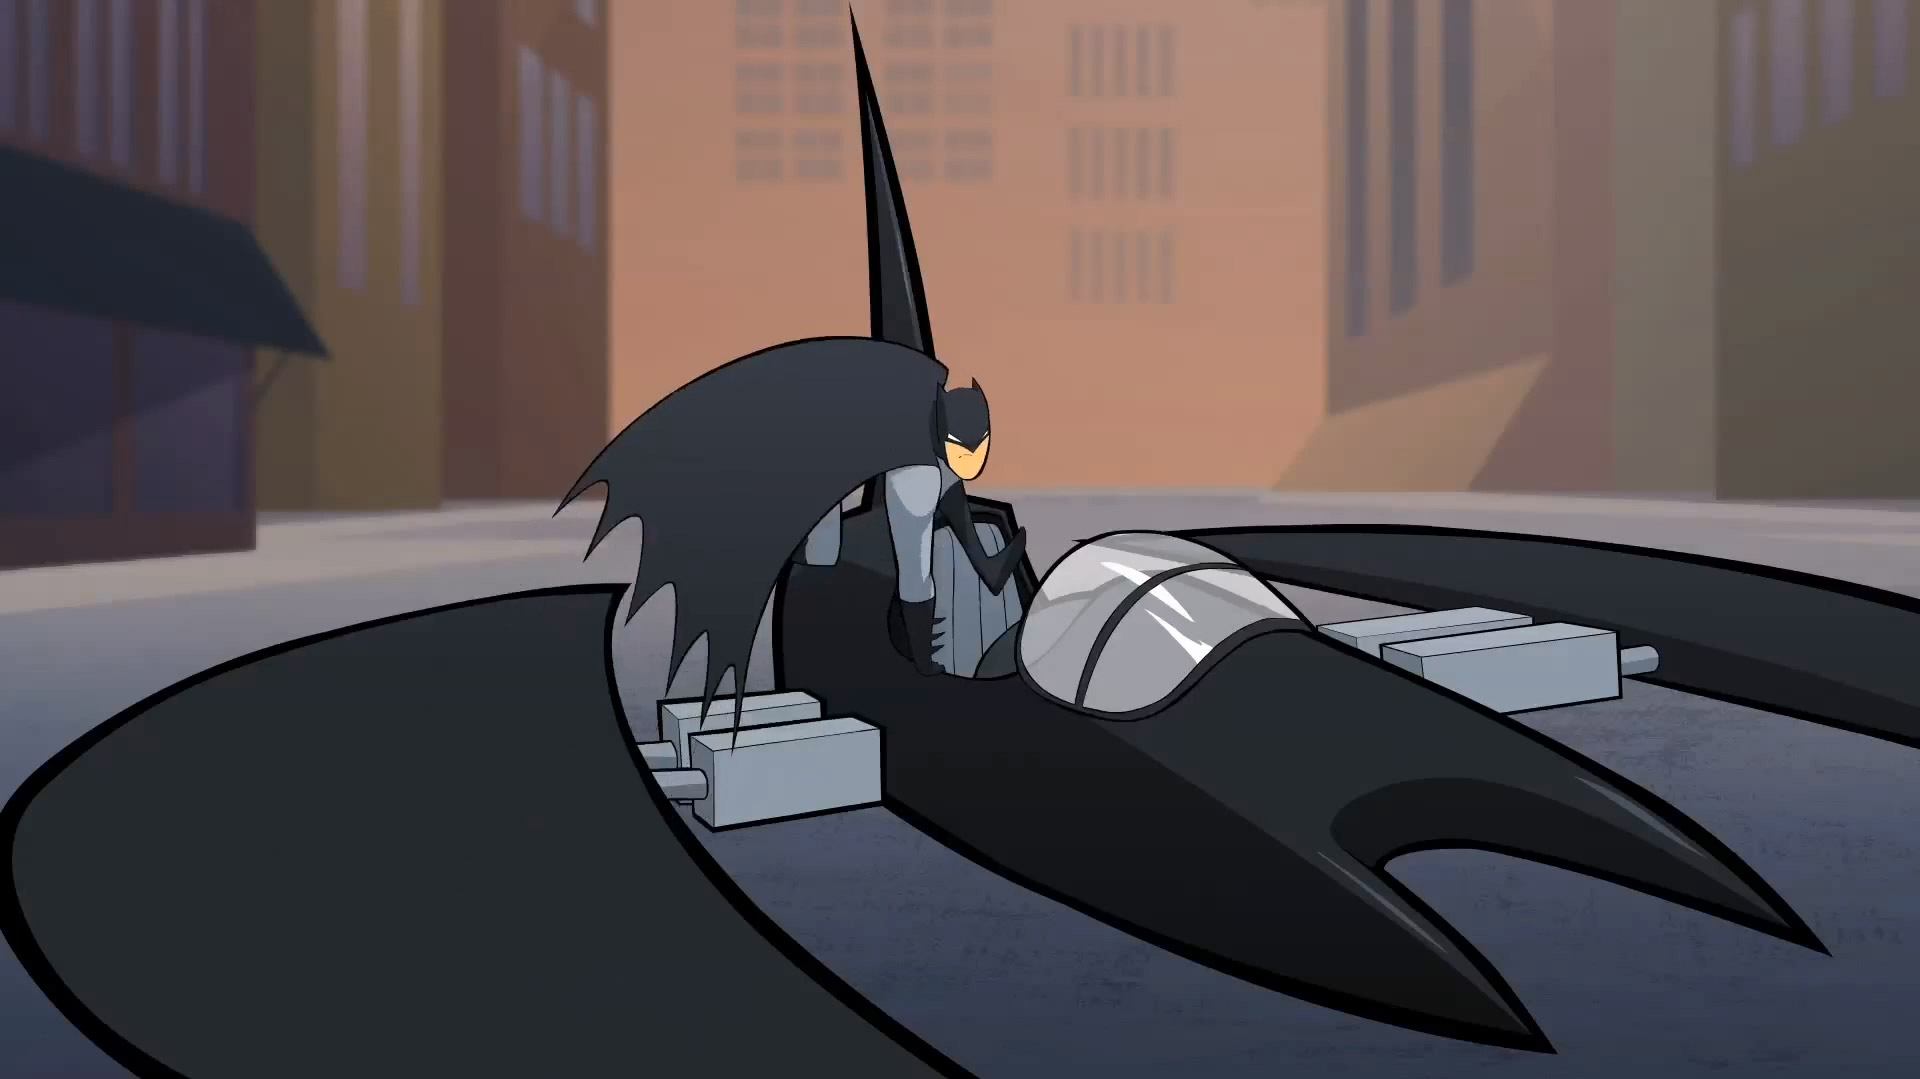 lois-lane-tries-to-interview-batman-in-animated-short-3.jpg